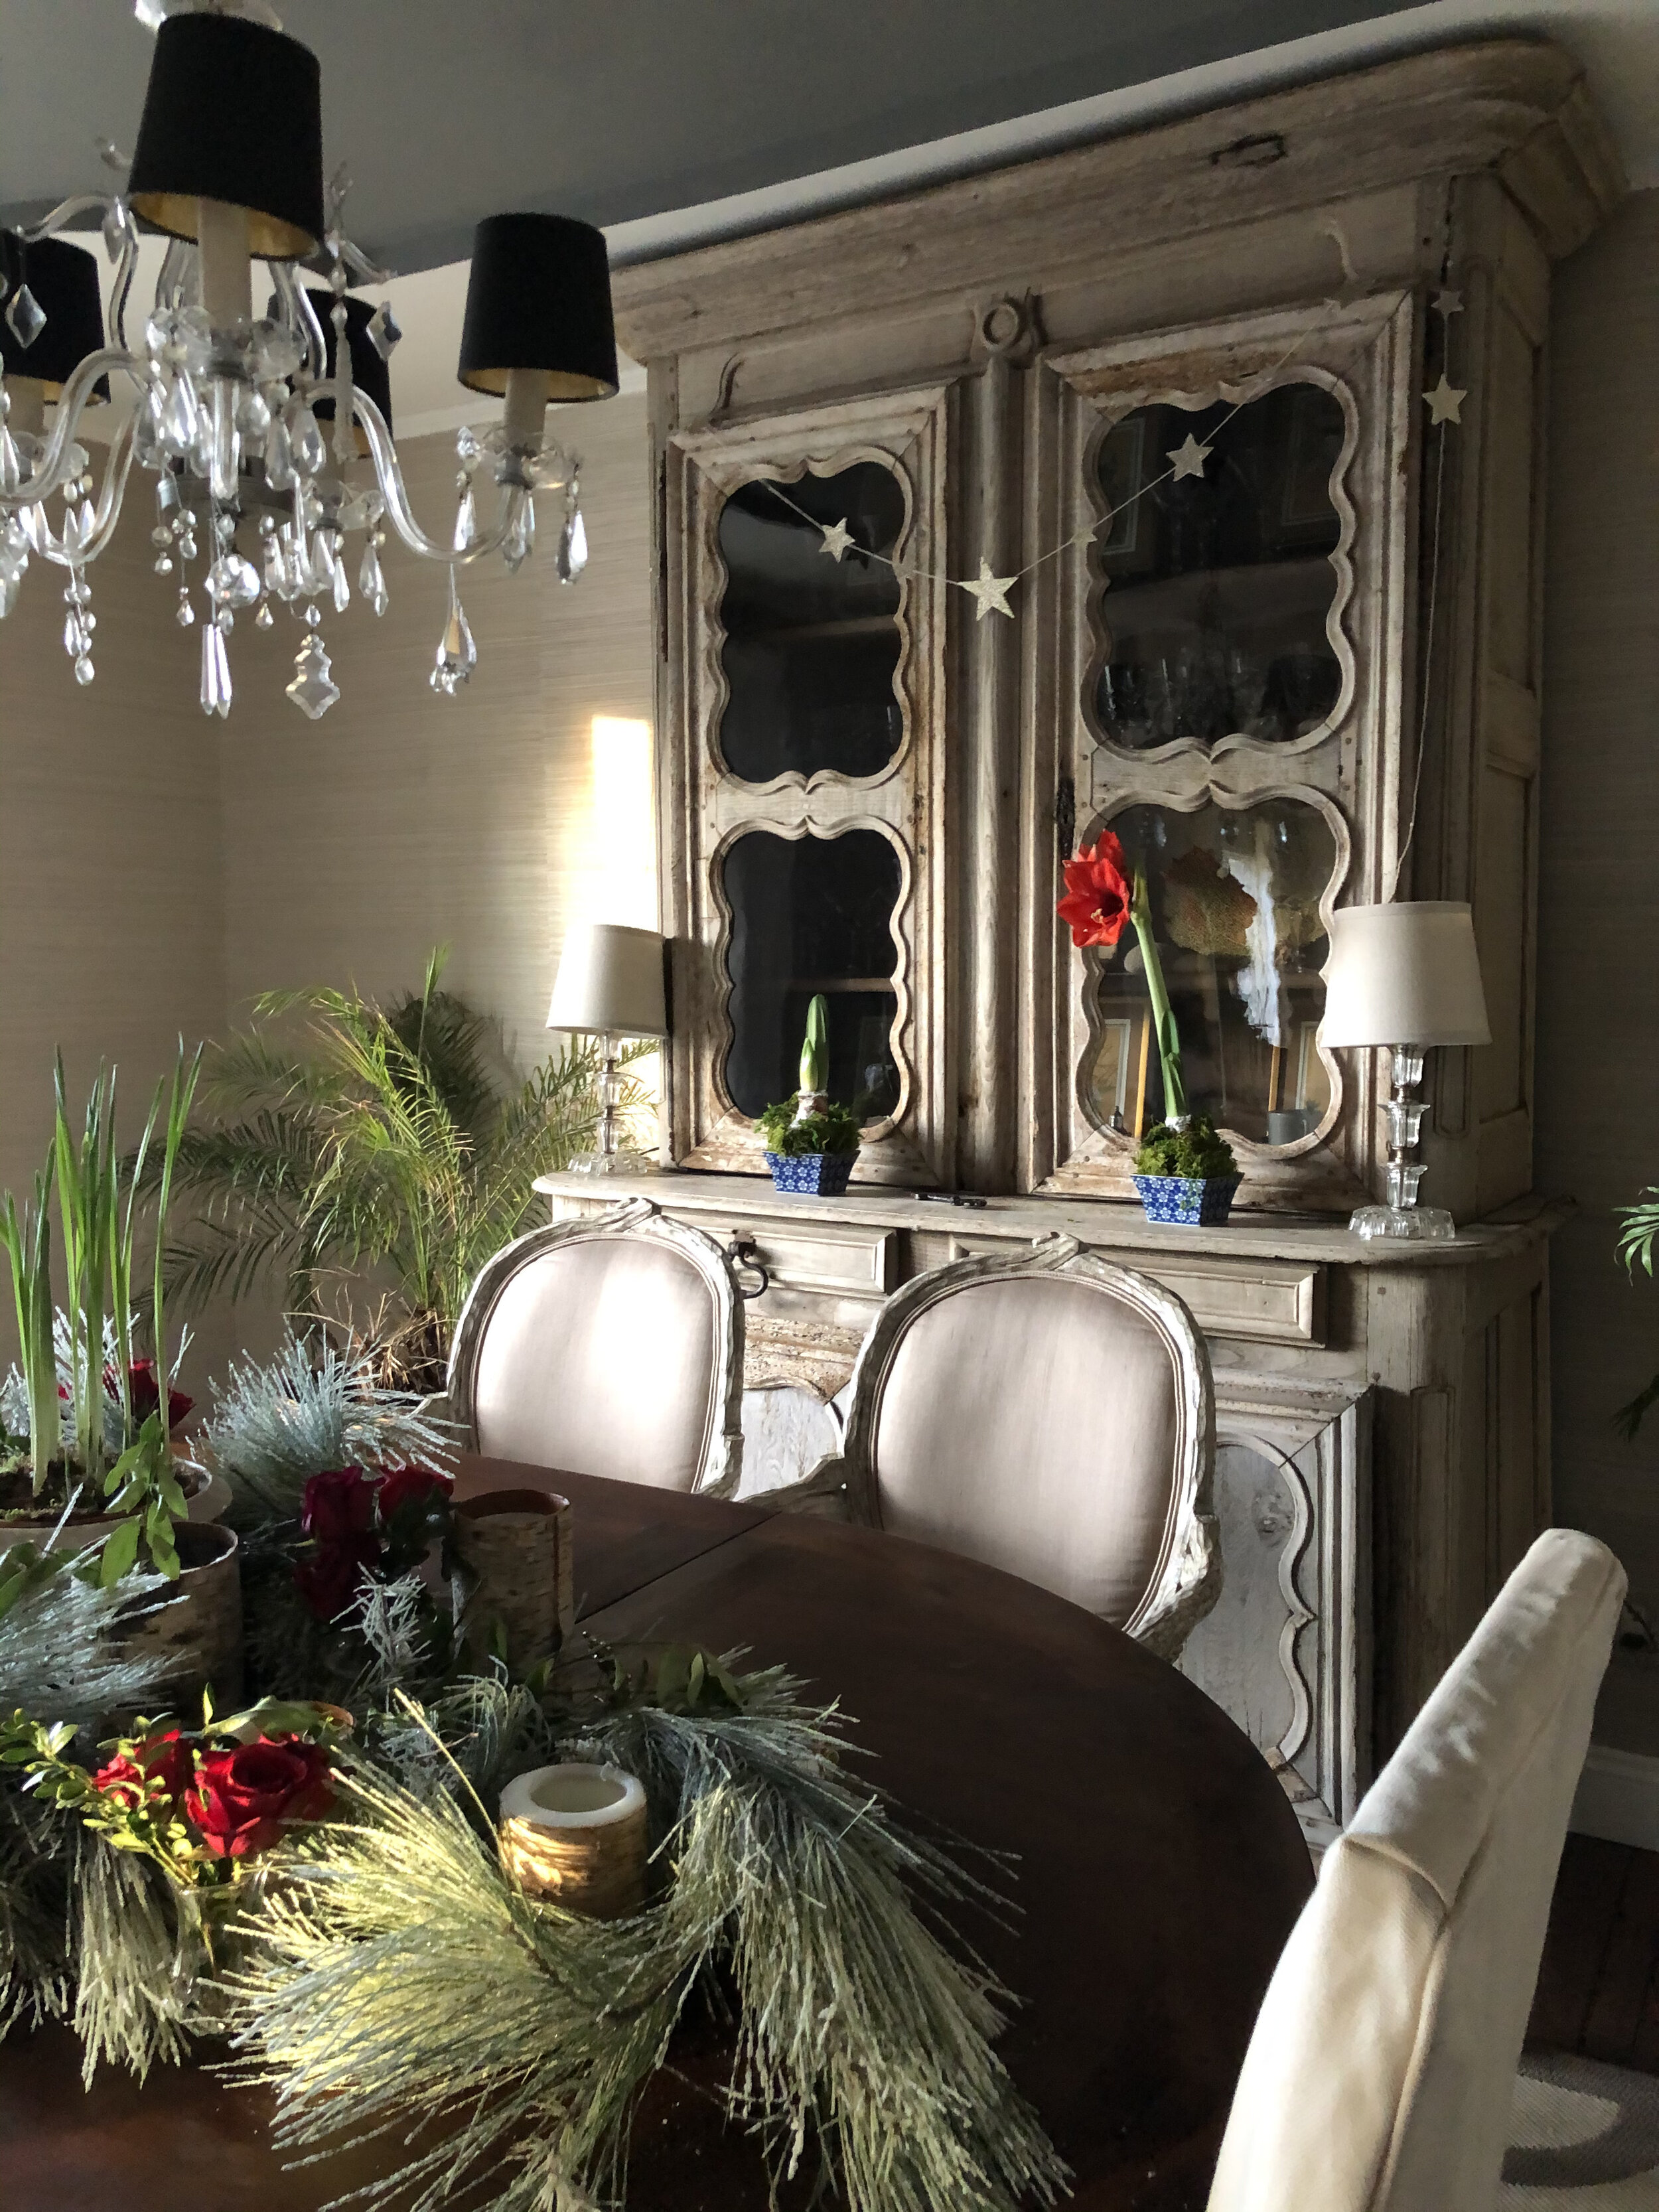 This stunning antique French armoire in our dining room is new to us this year, dressed up for Christmas with a simple DIY glitter star garland